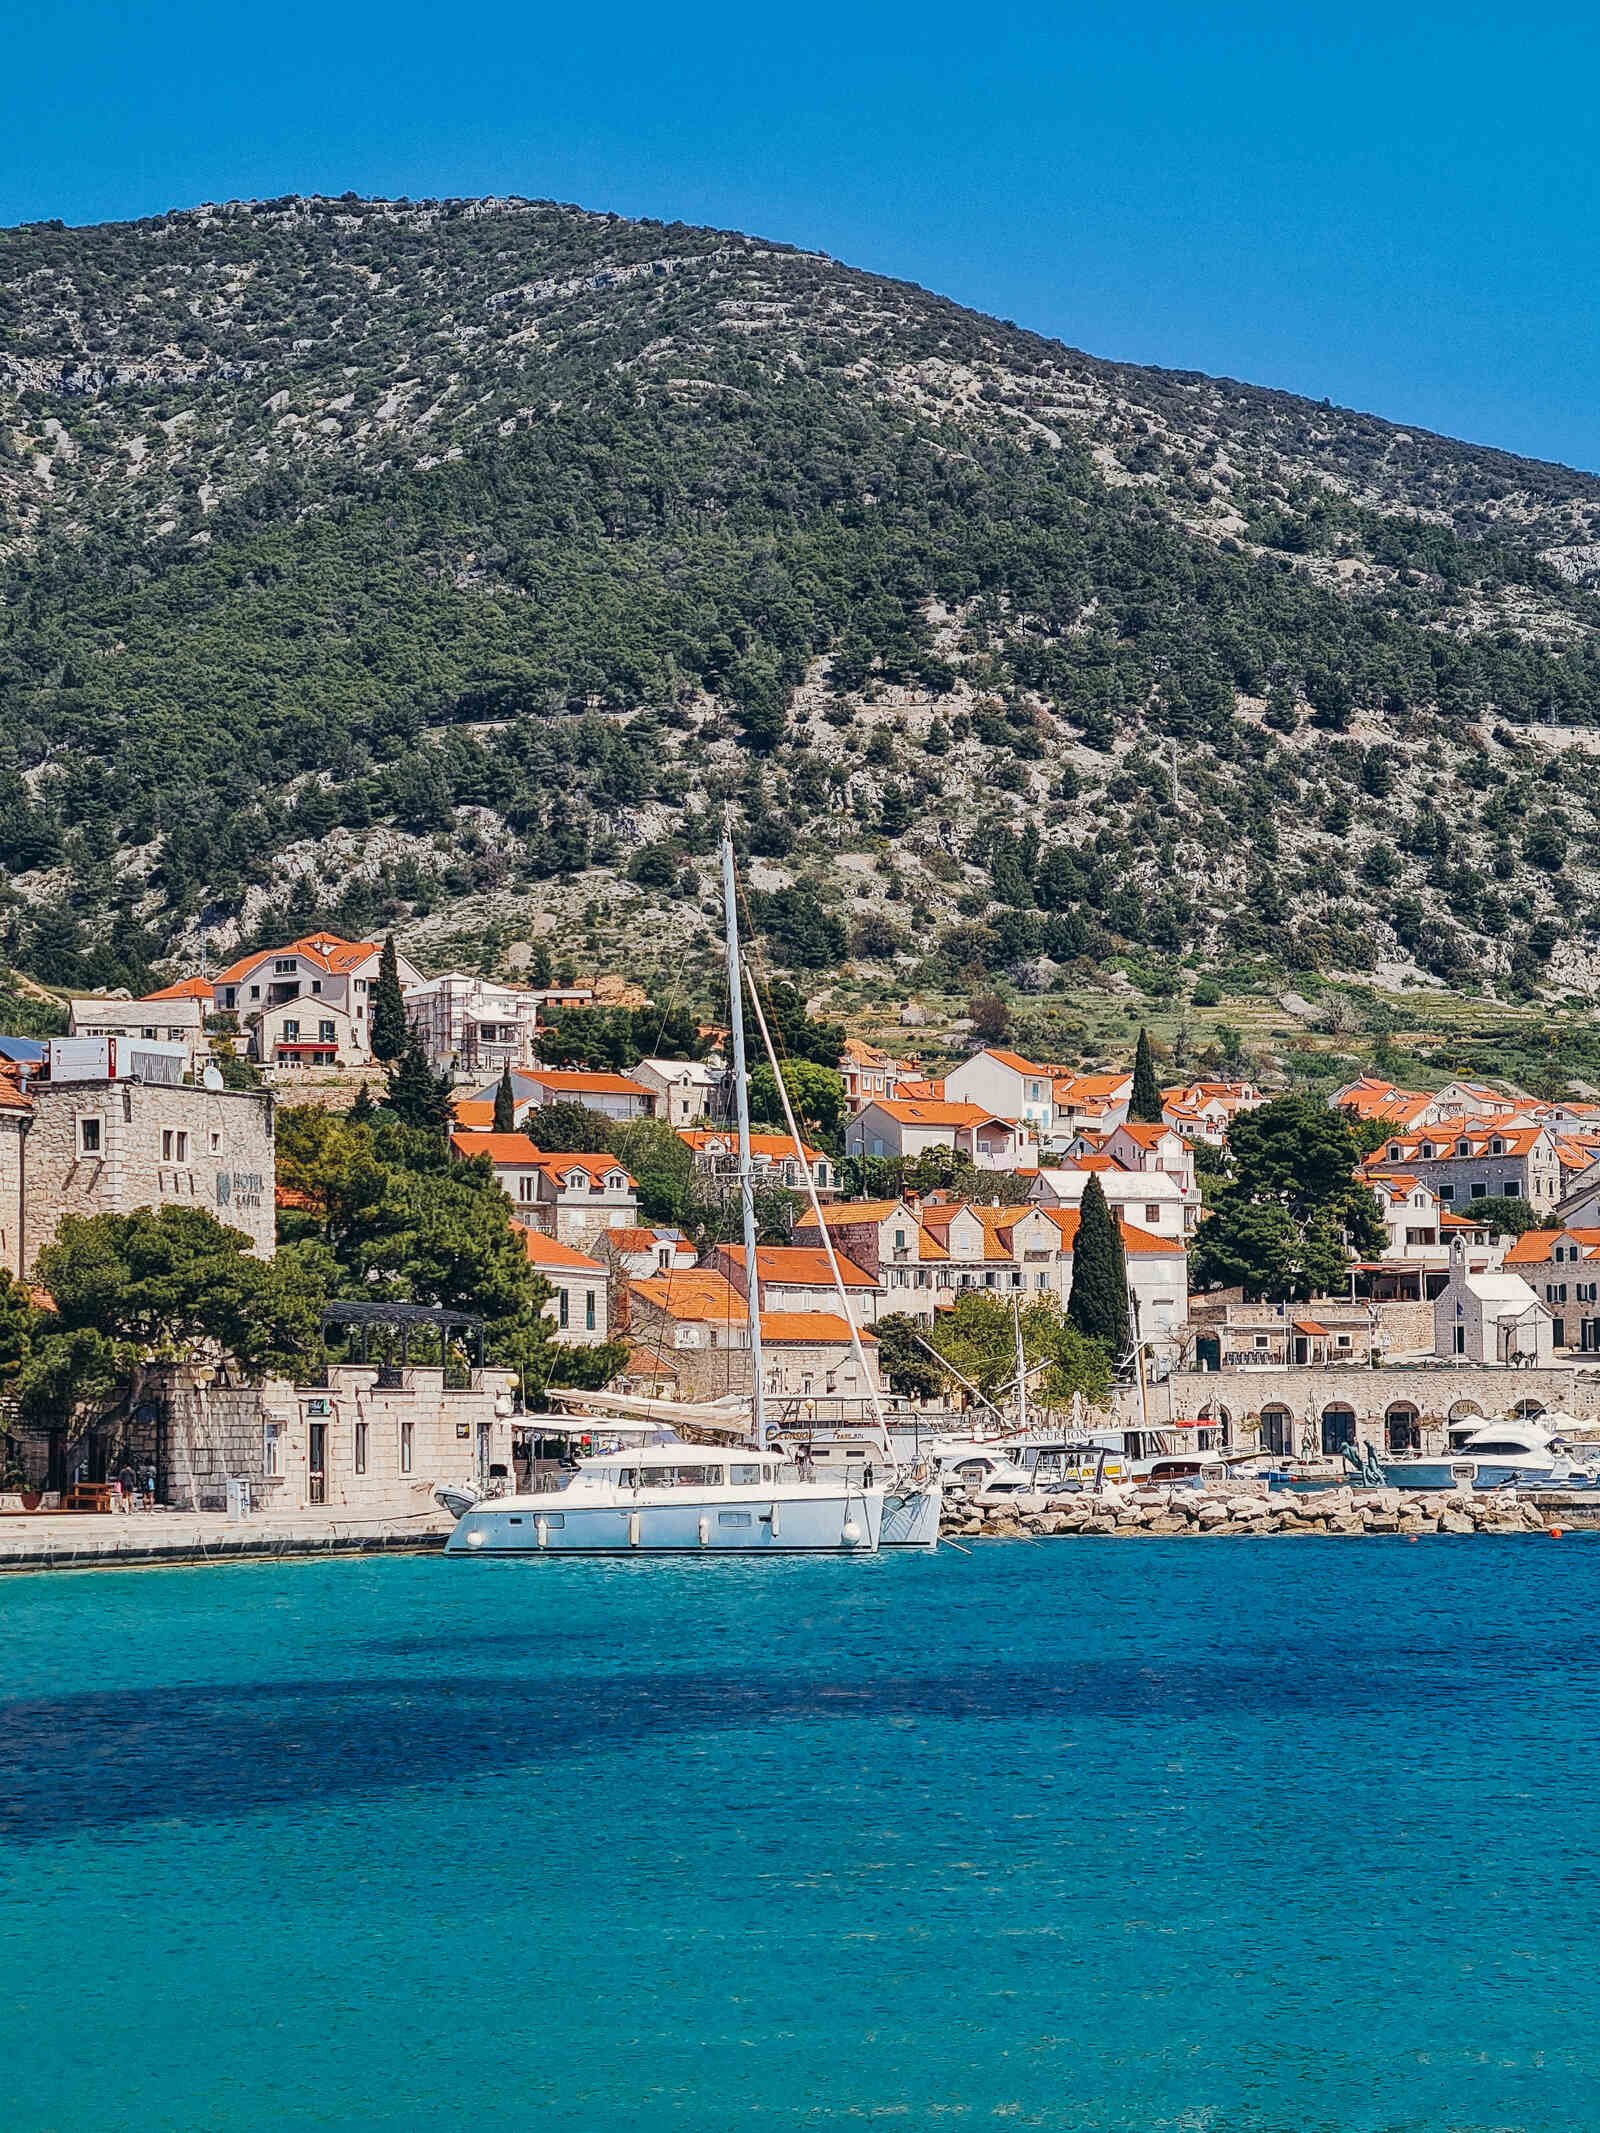 Looking across blue sea to a town on the hillside with houses made of stone and orange rooftops. A catamaran is docked in front of the town. A mountain towers behind the town